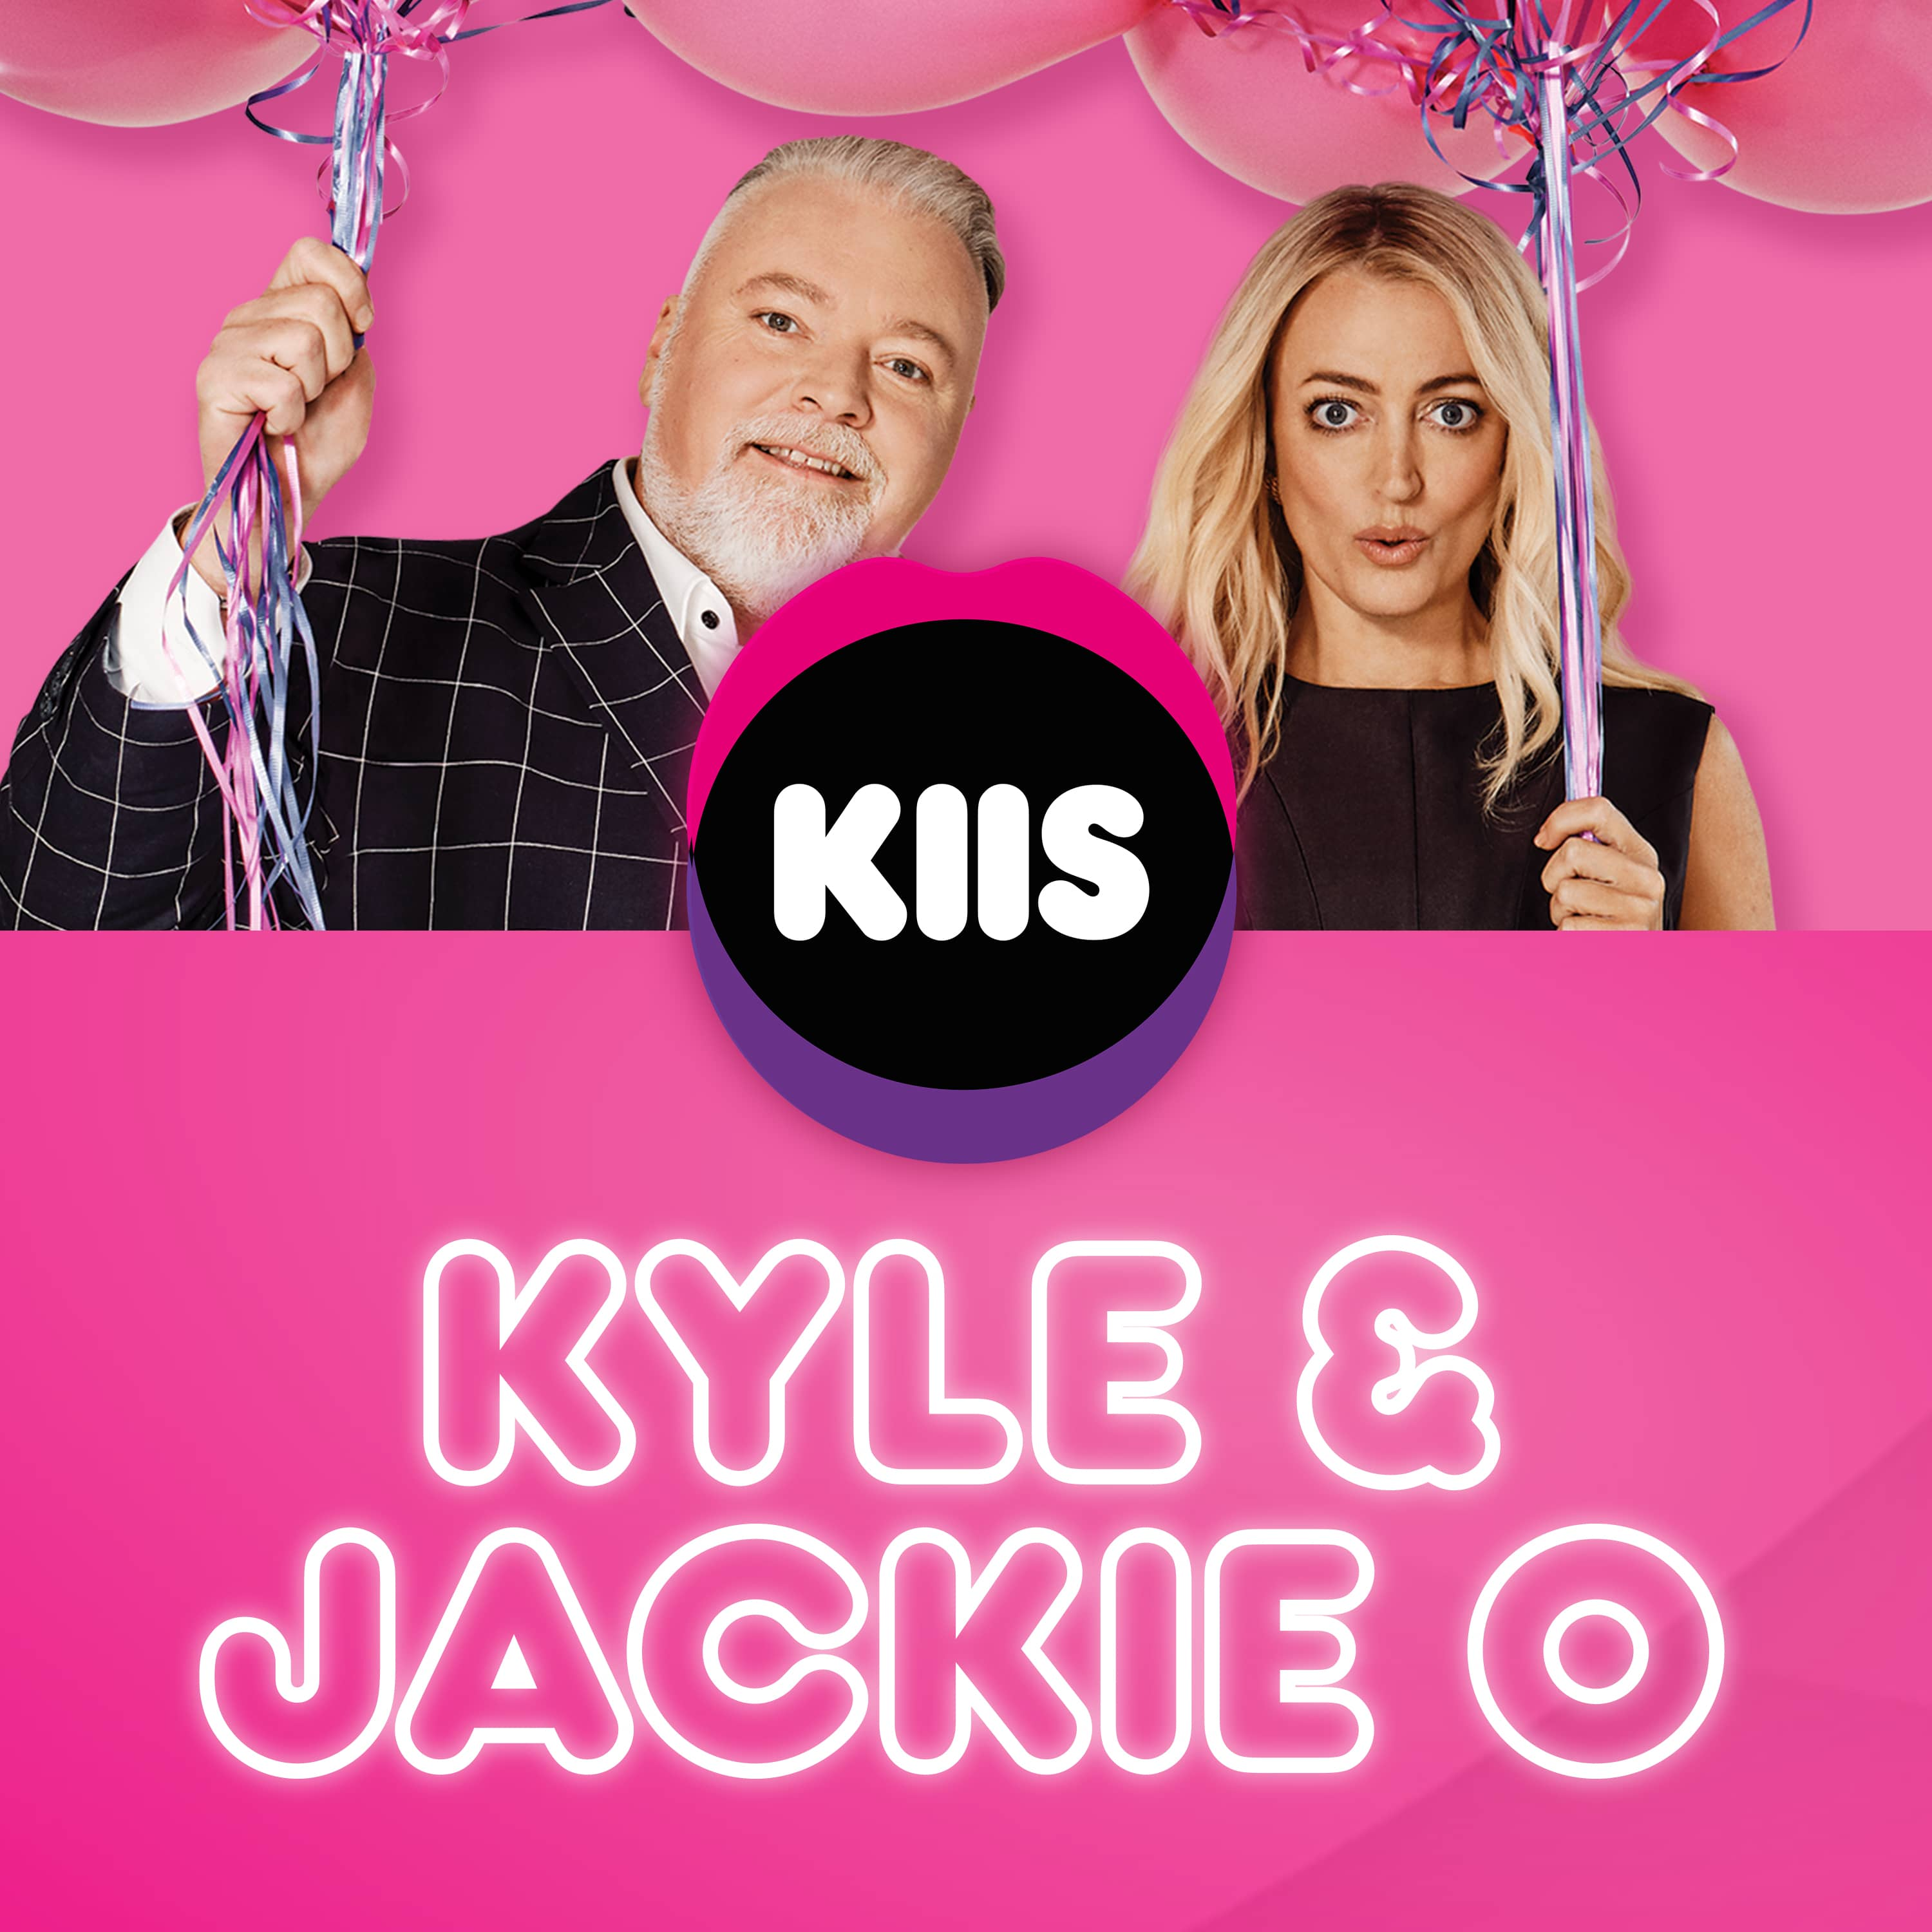 ❤️ Why Kyle & Jackie O are giving away MILLIONS...